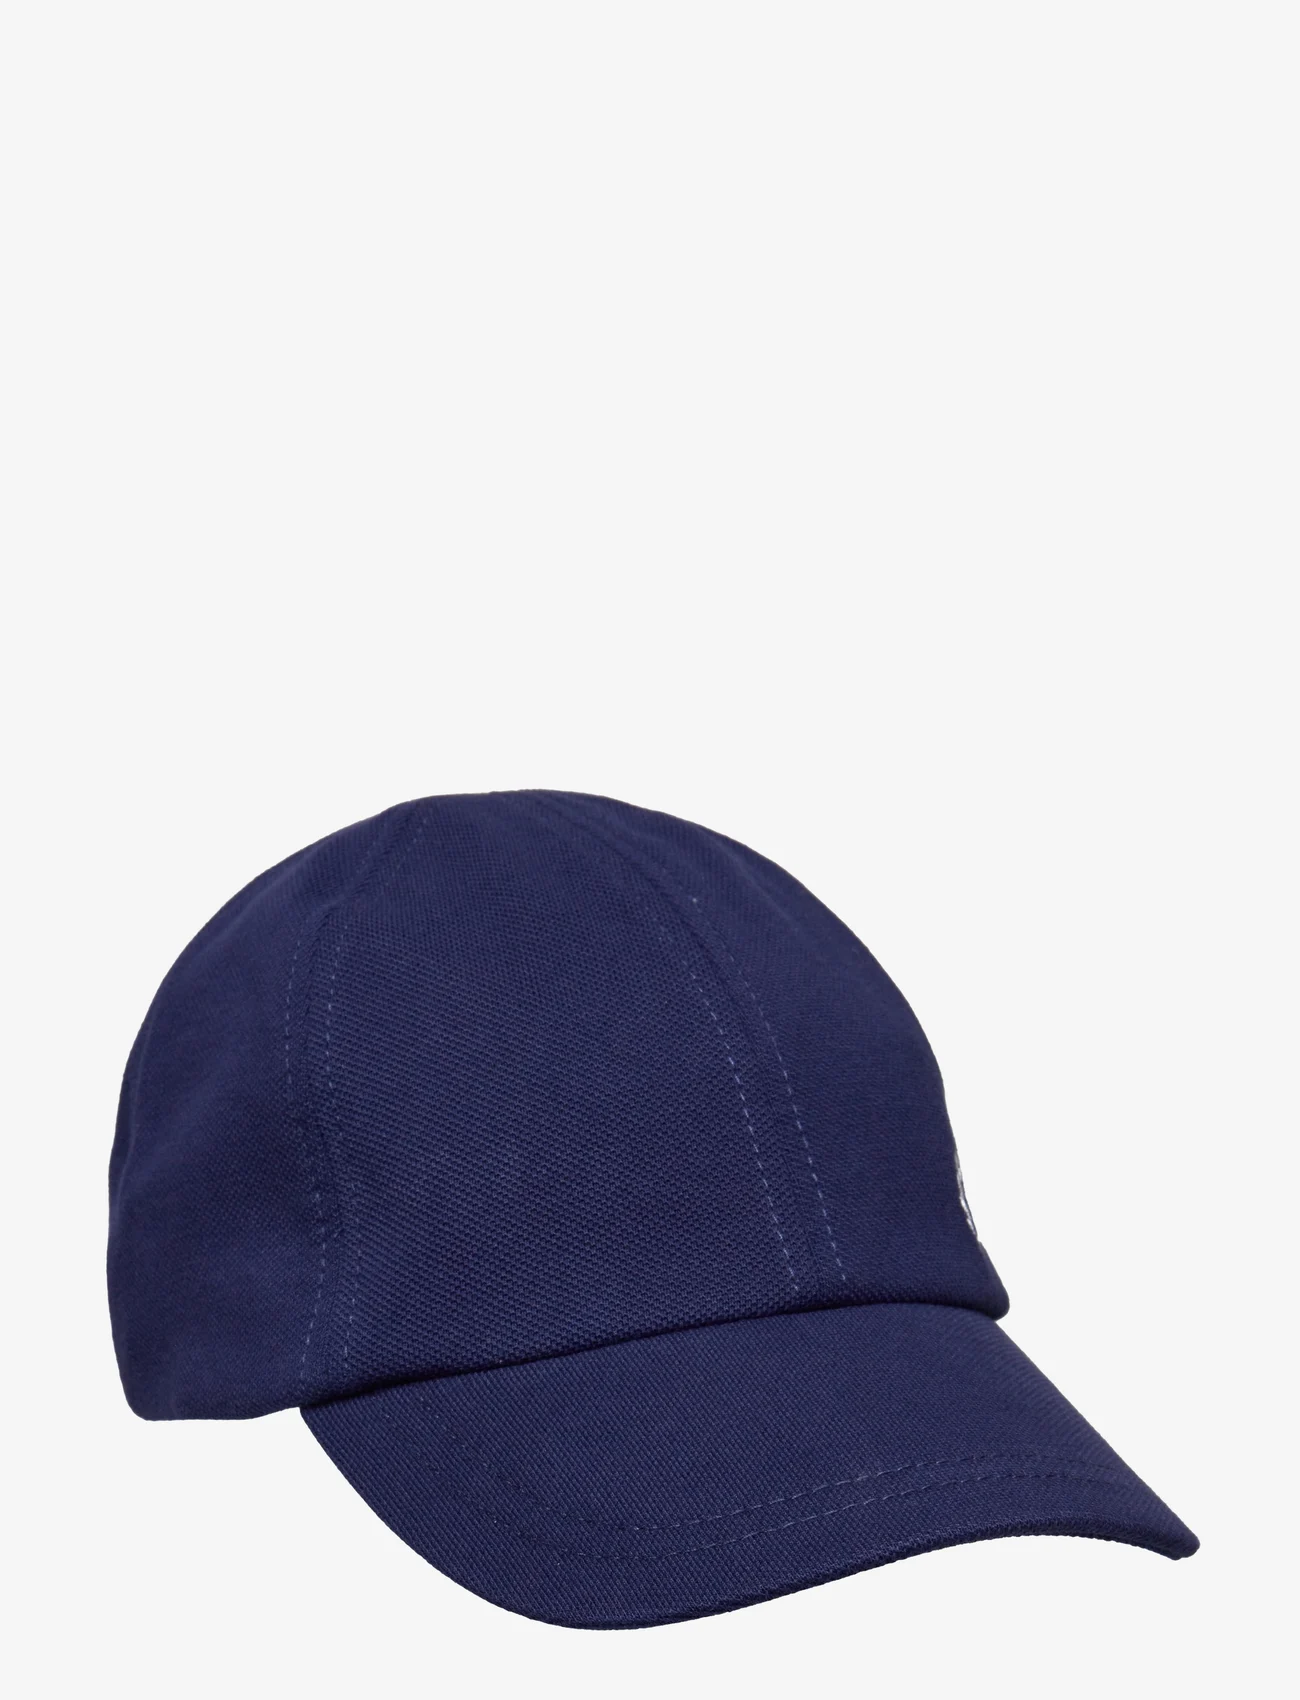 Fred Perry - PIQUE CLASSIC CAP - kepurės su snapeliu - french navy - 0